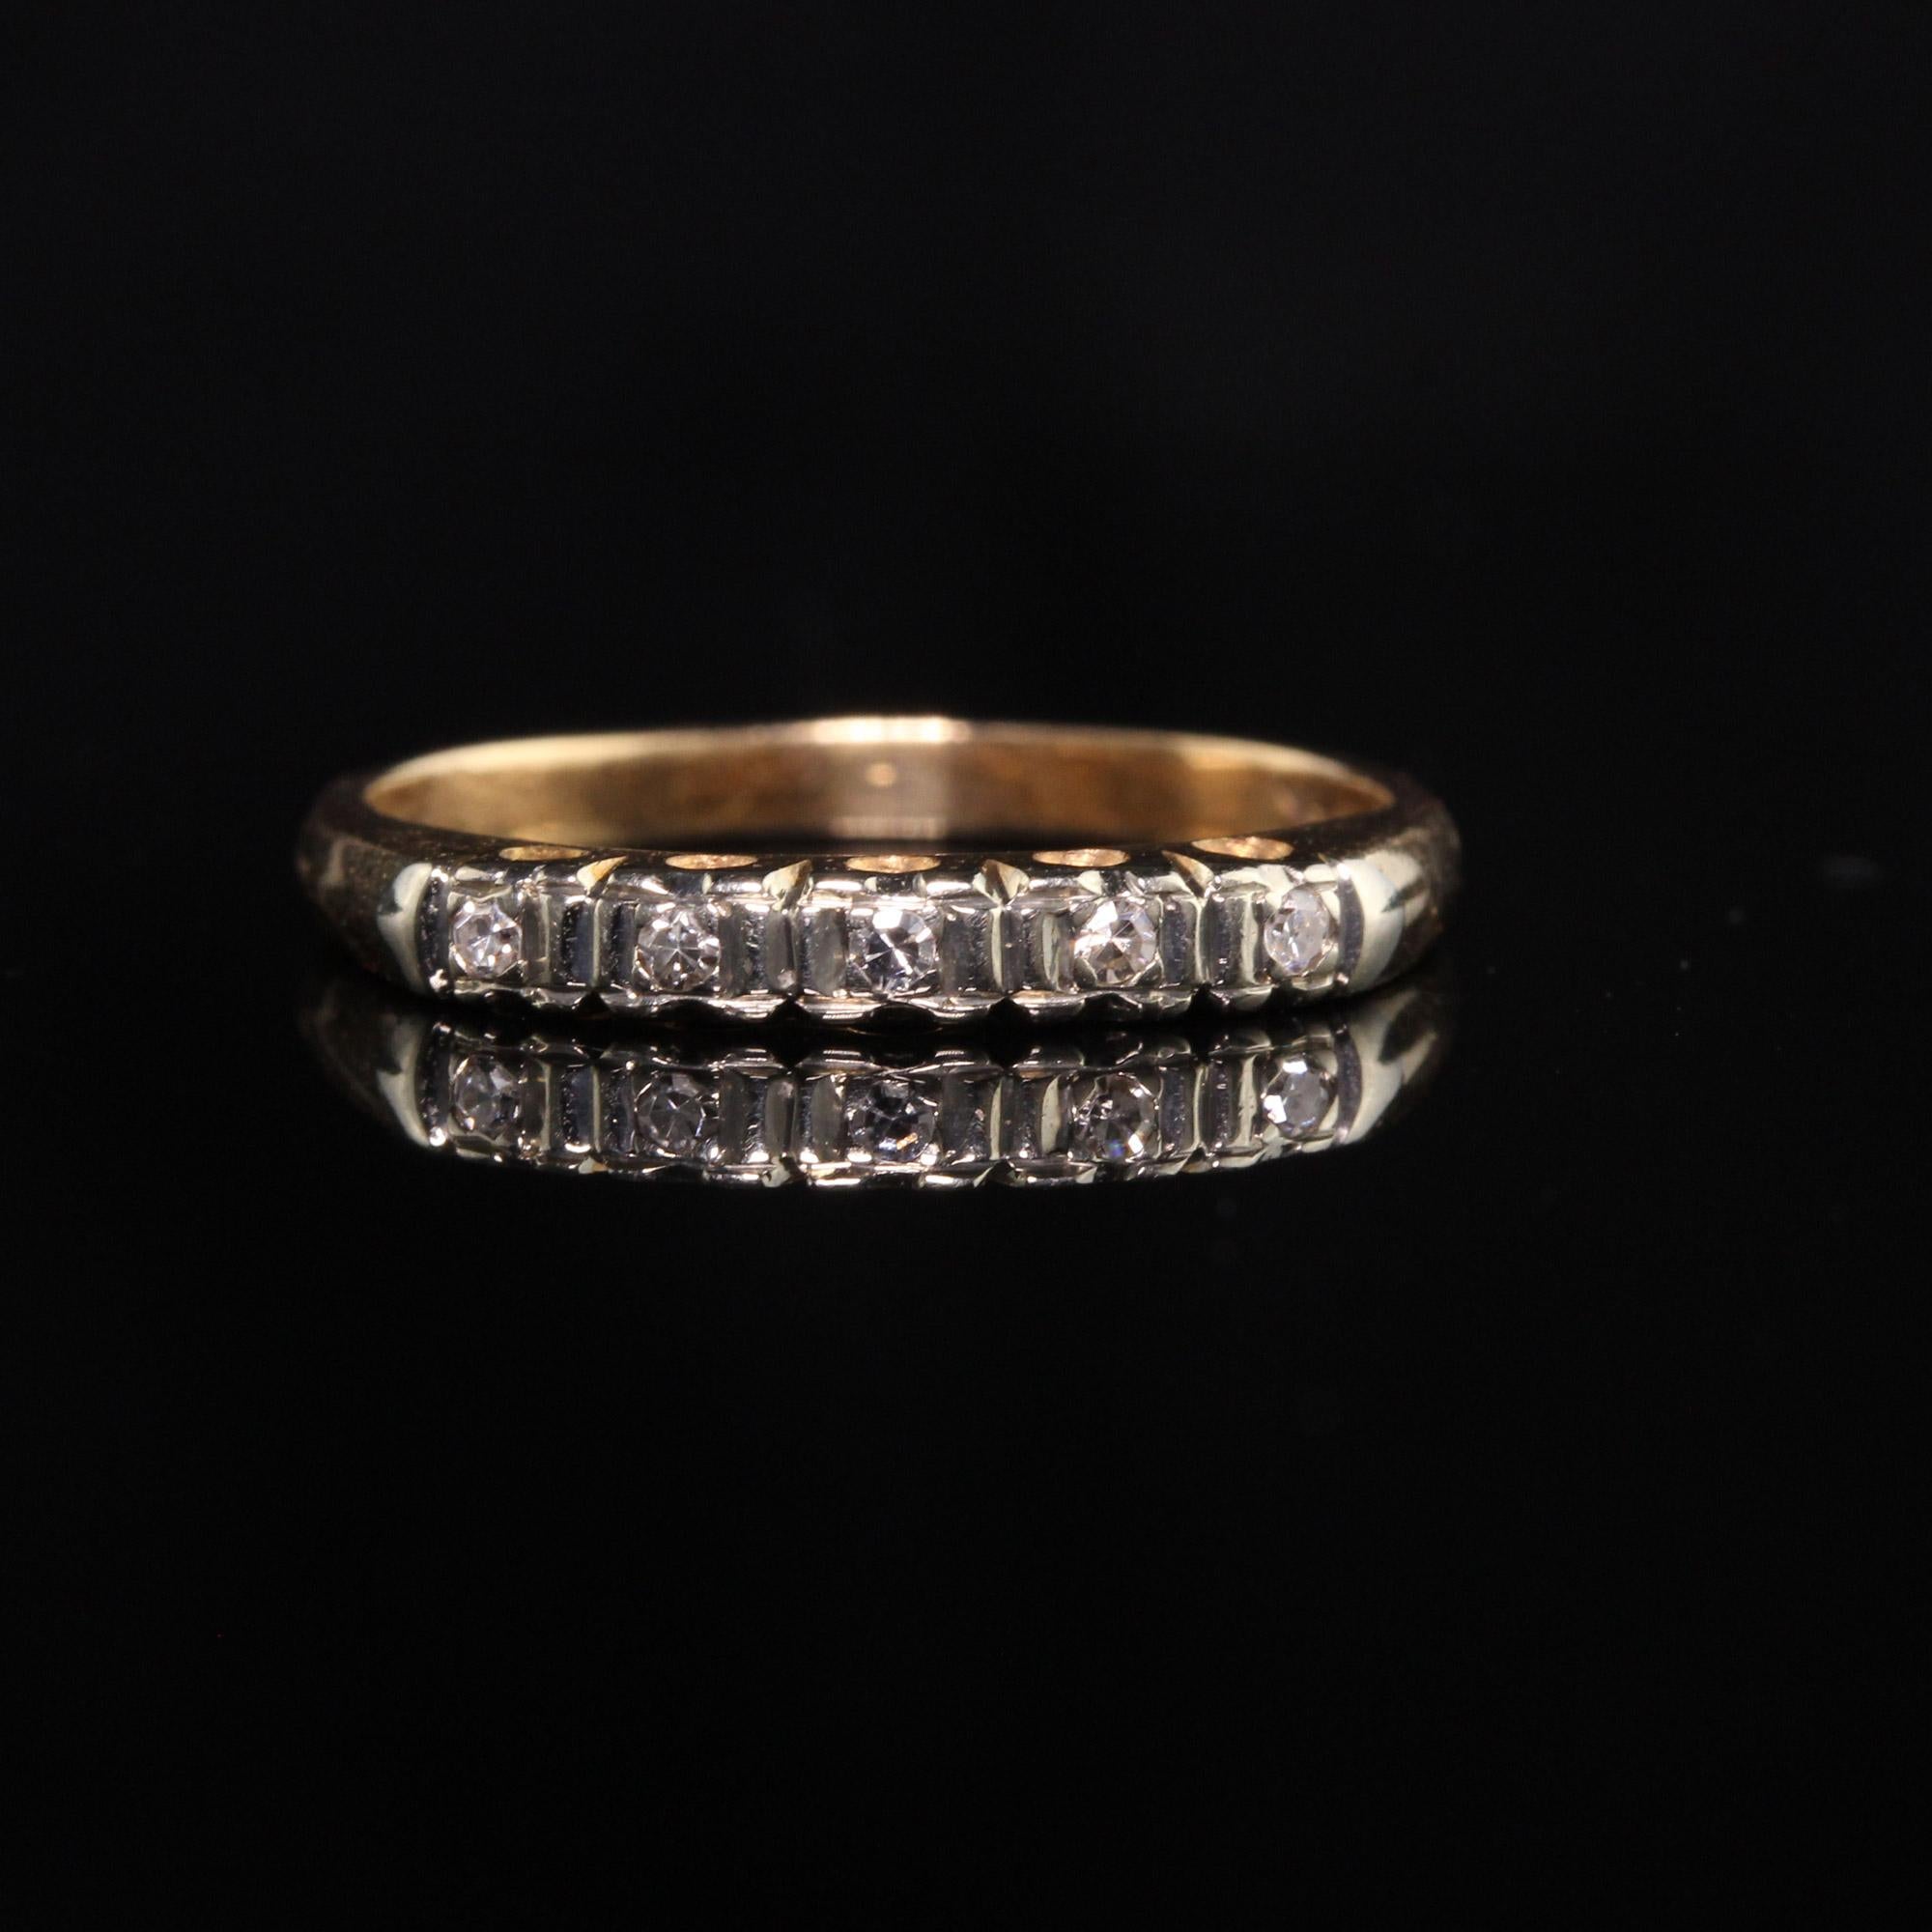 Antique Art Deco 14K Yellow Gold Single Cut Diamond Wedding Band In Good Condition For Sale In Great Neck, NY